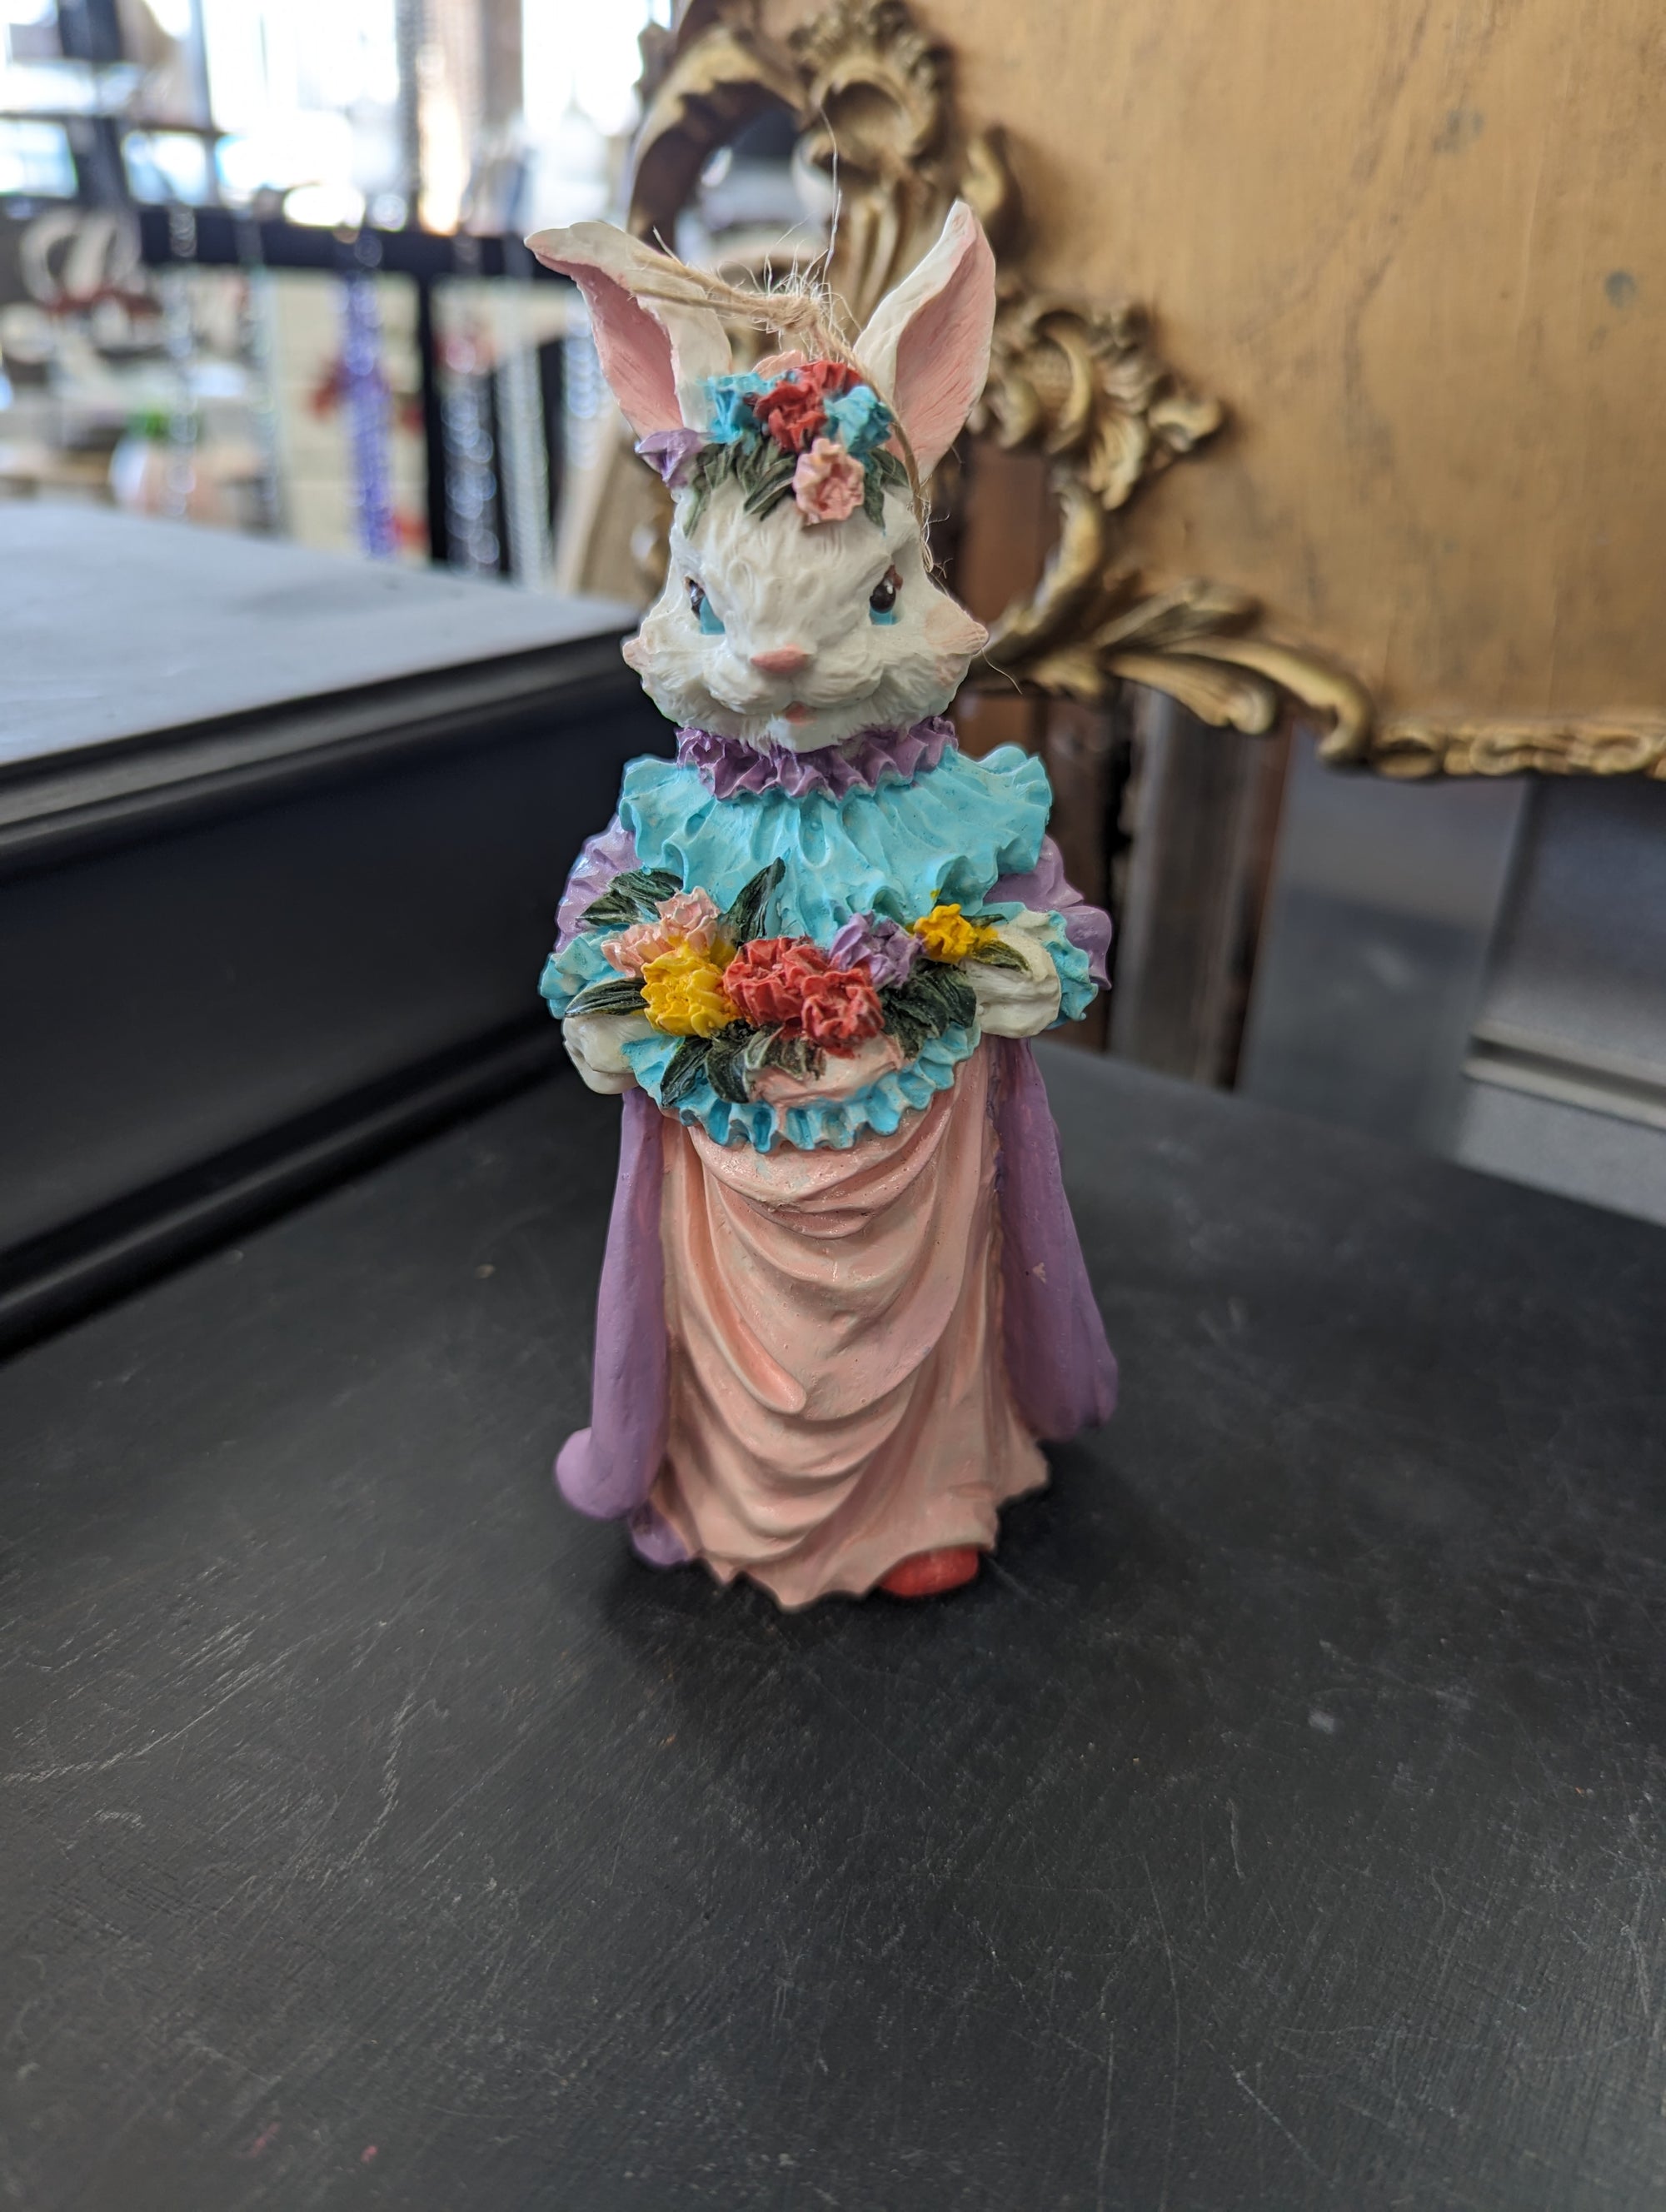 Vintage Easter Bunny w/Apron Full of Flowers & in Her Hair